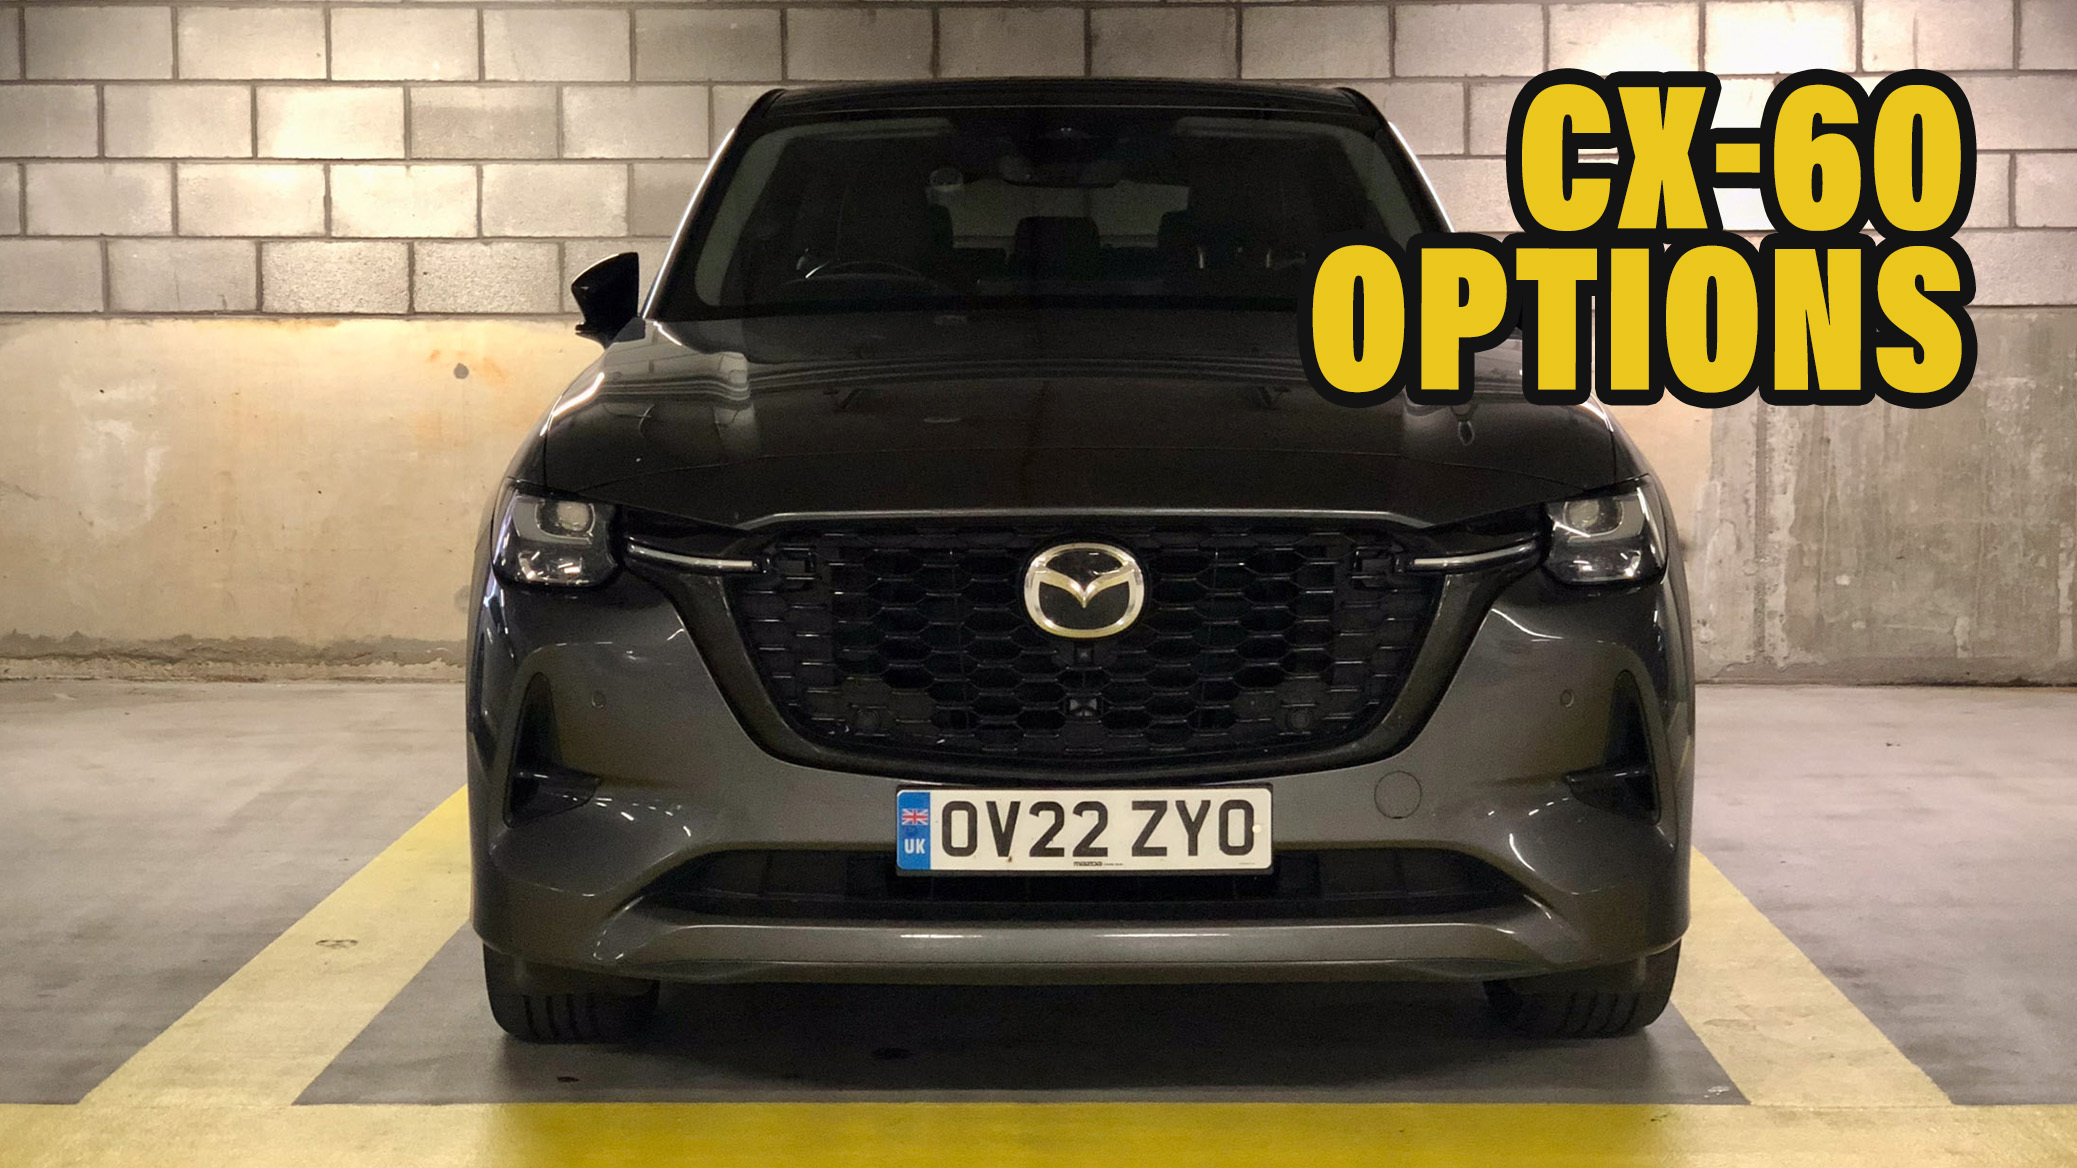 2023 Mazda CX-60 Long-Term Review: Living With Mazda's New Premium